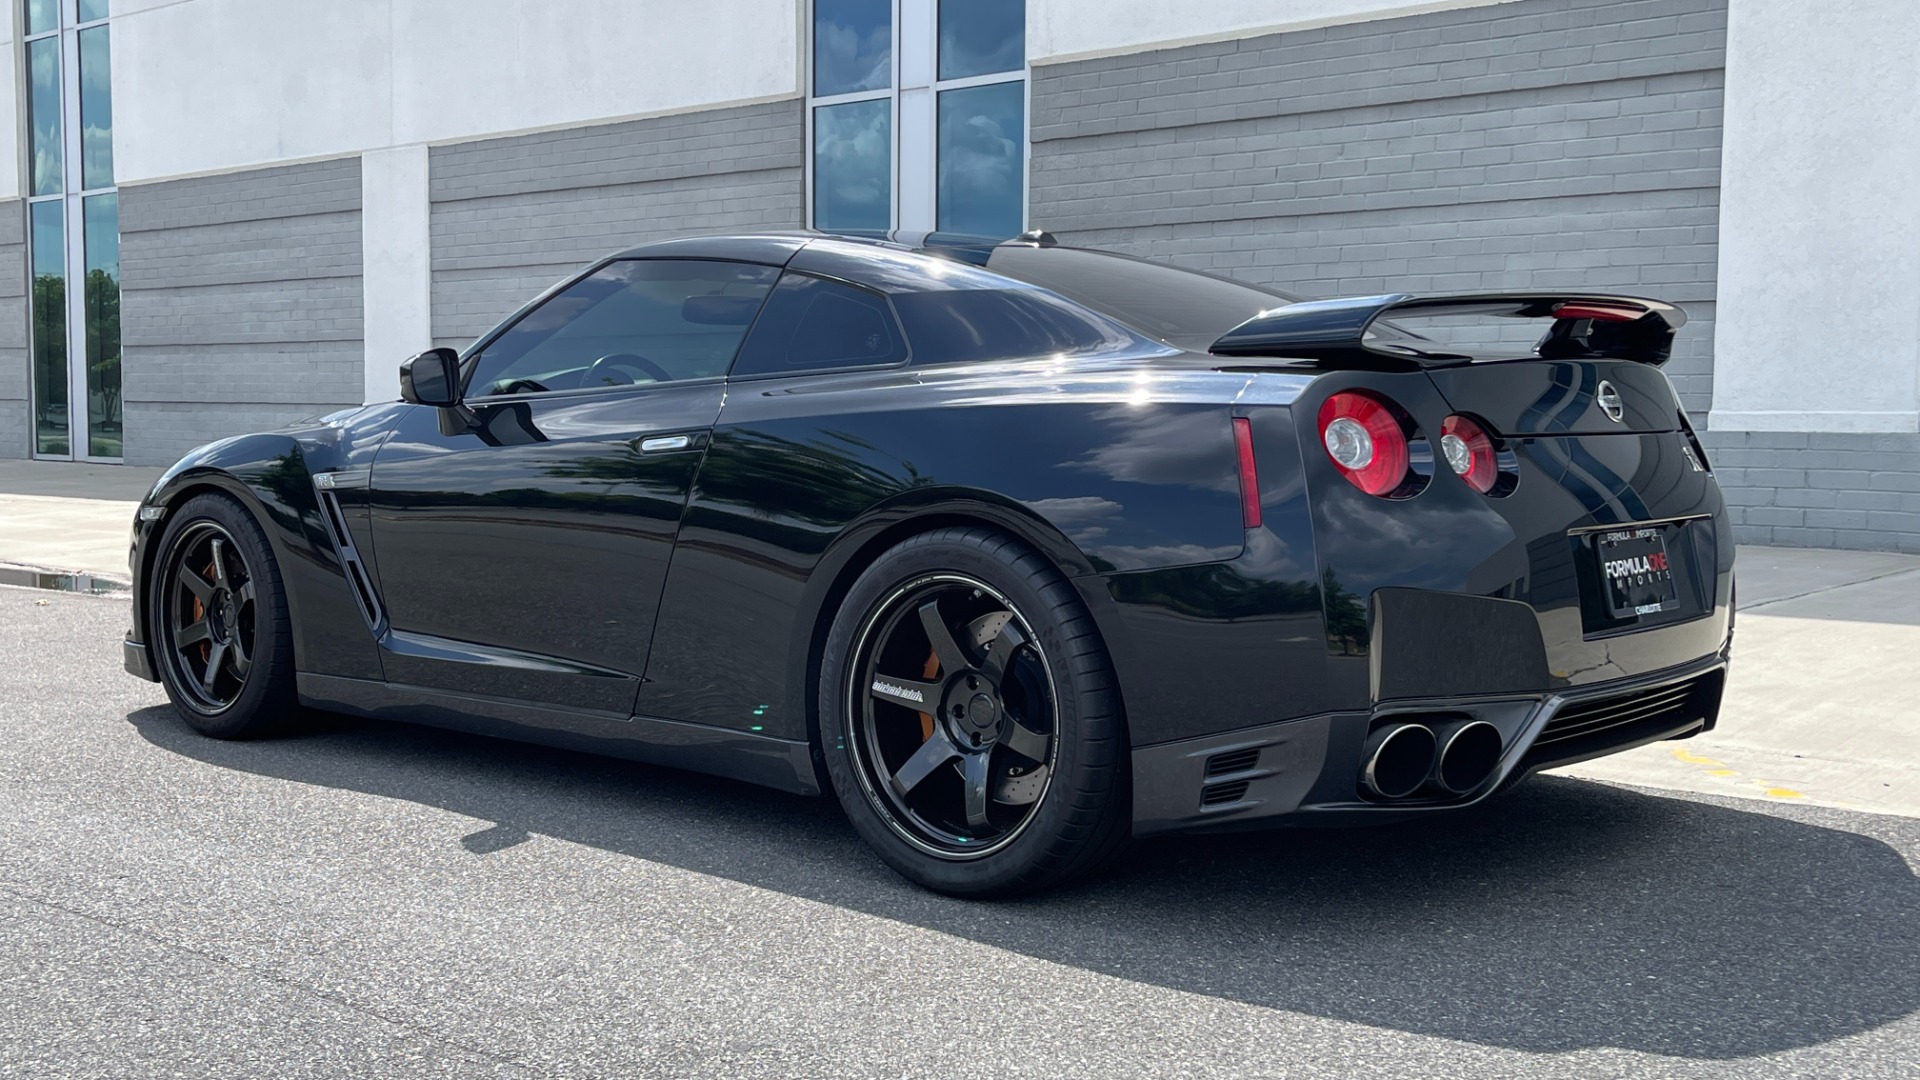 Used 2013 Nissan GT-R PREMIUM COUPE / 3.8L TWIN-TURBO / 6-SPD AUTO / COLD WTHR PKG / CAMERA for sale $75,995 at Formula Imports in Charlotte NC 28227 6